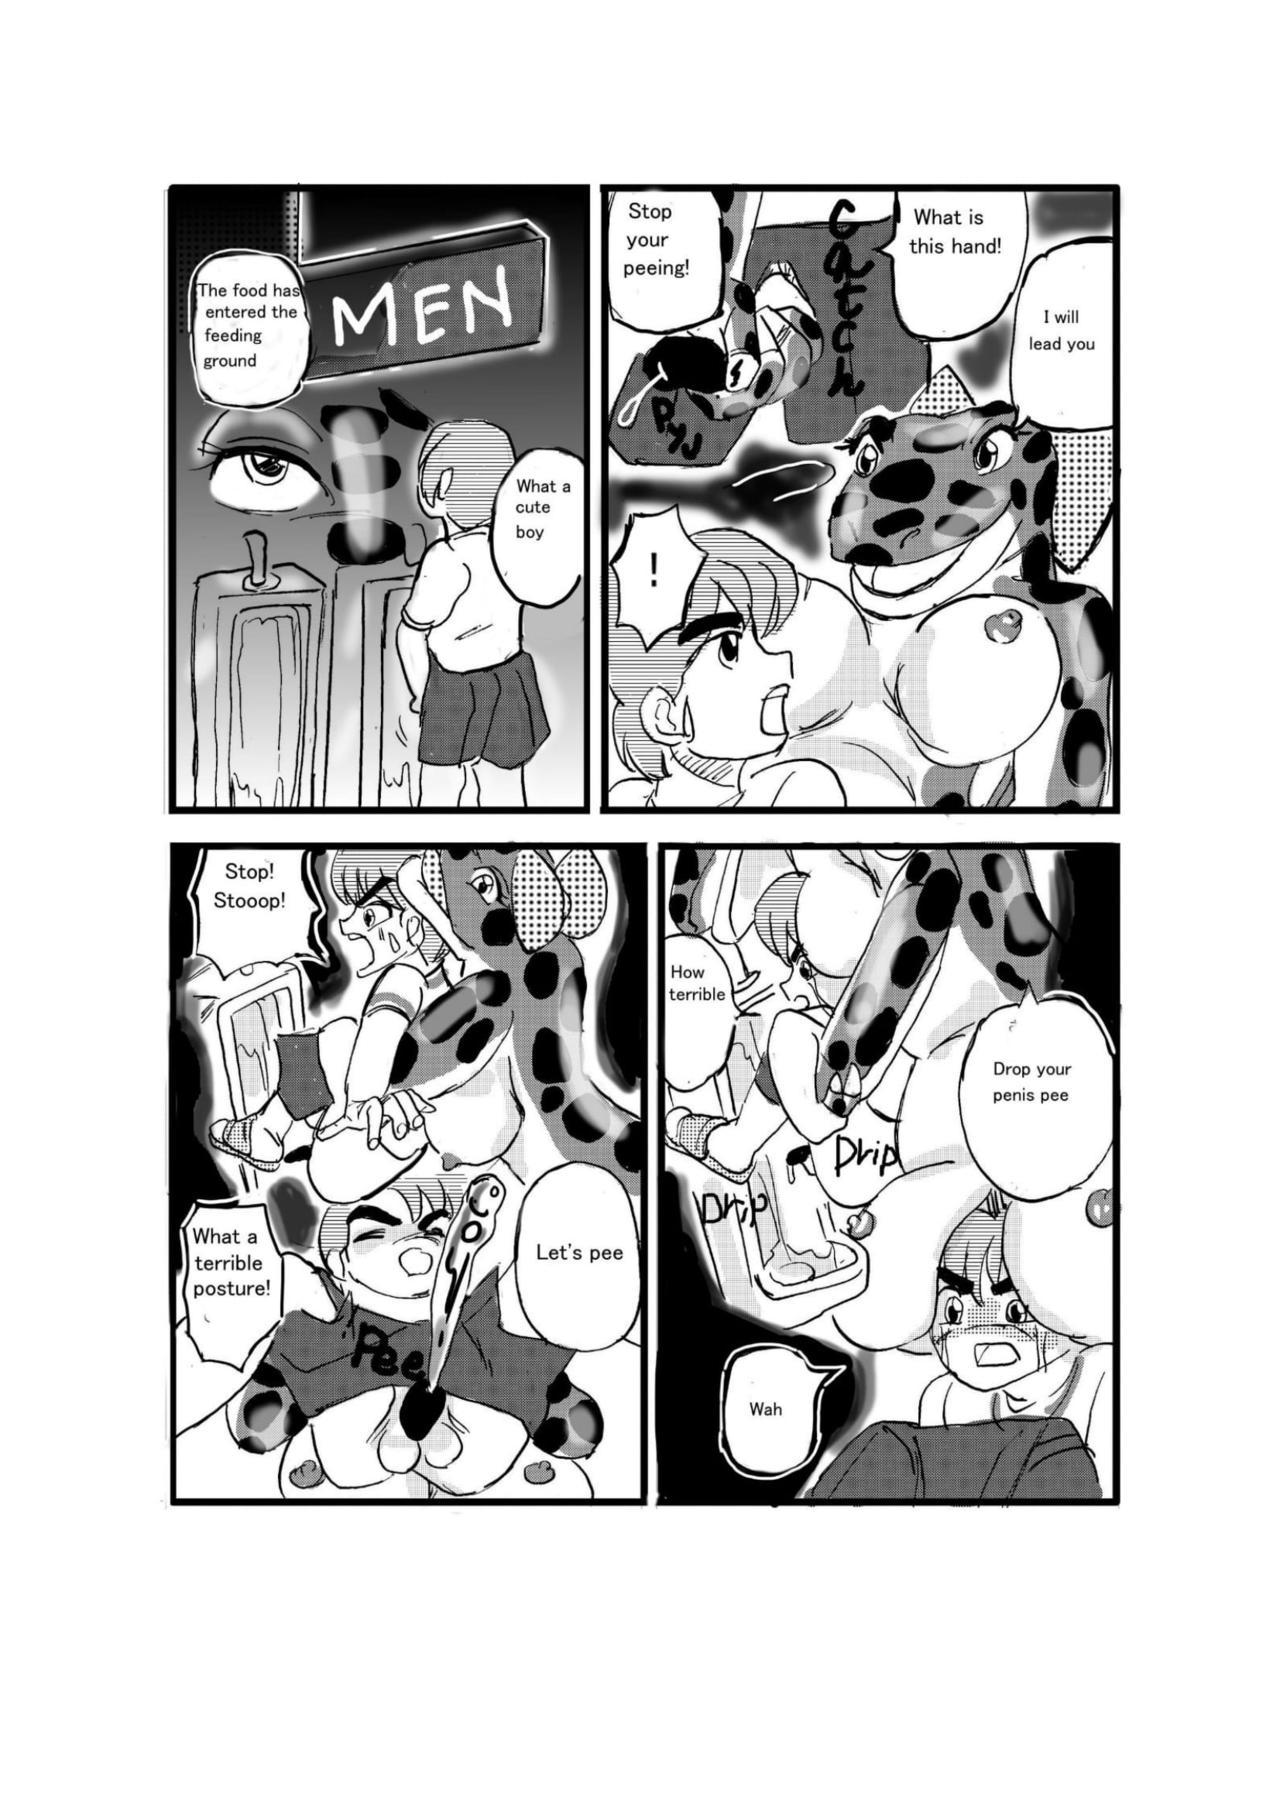 Ex Girlfriends Swallowed Whole vol.2 Waniko + What's Digestion? - Original Hot Wife - Page 3